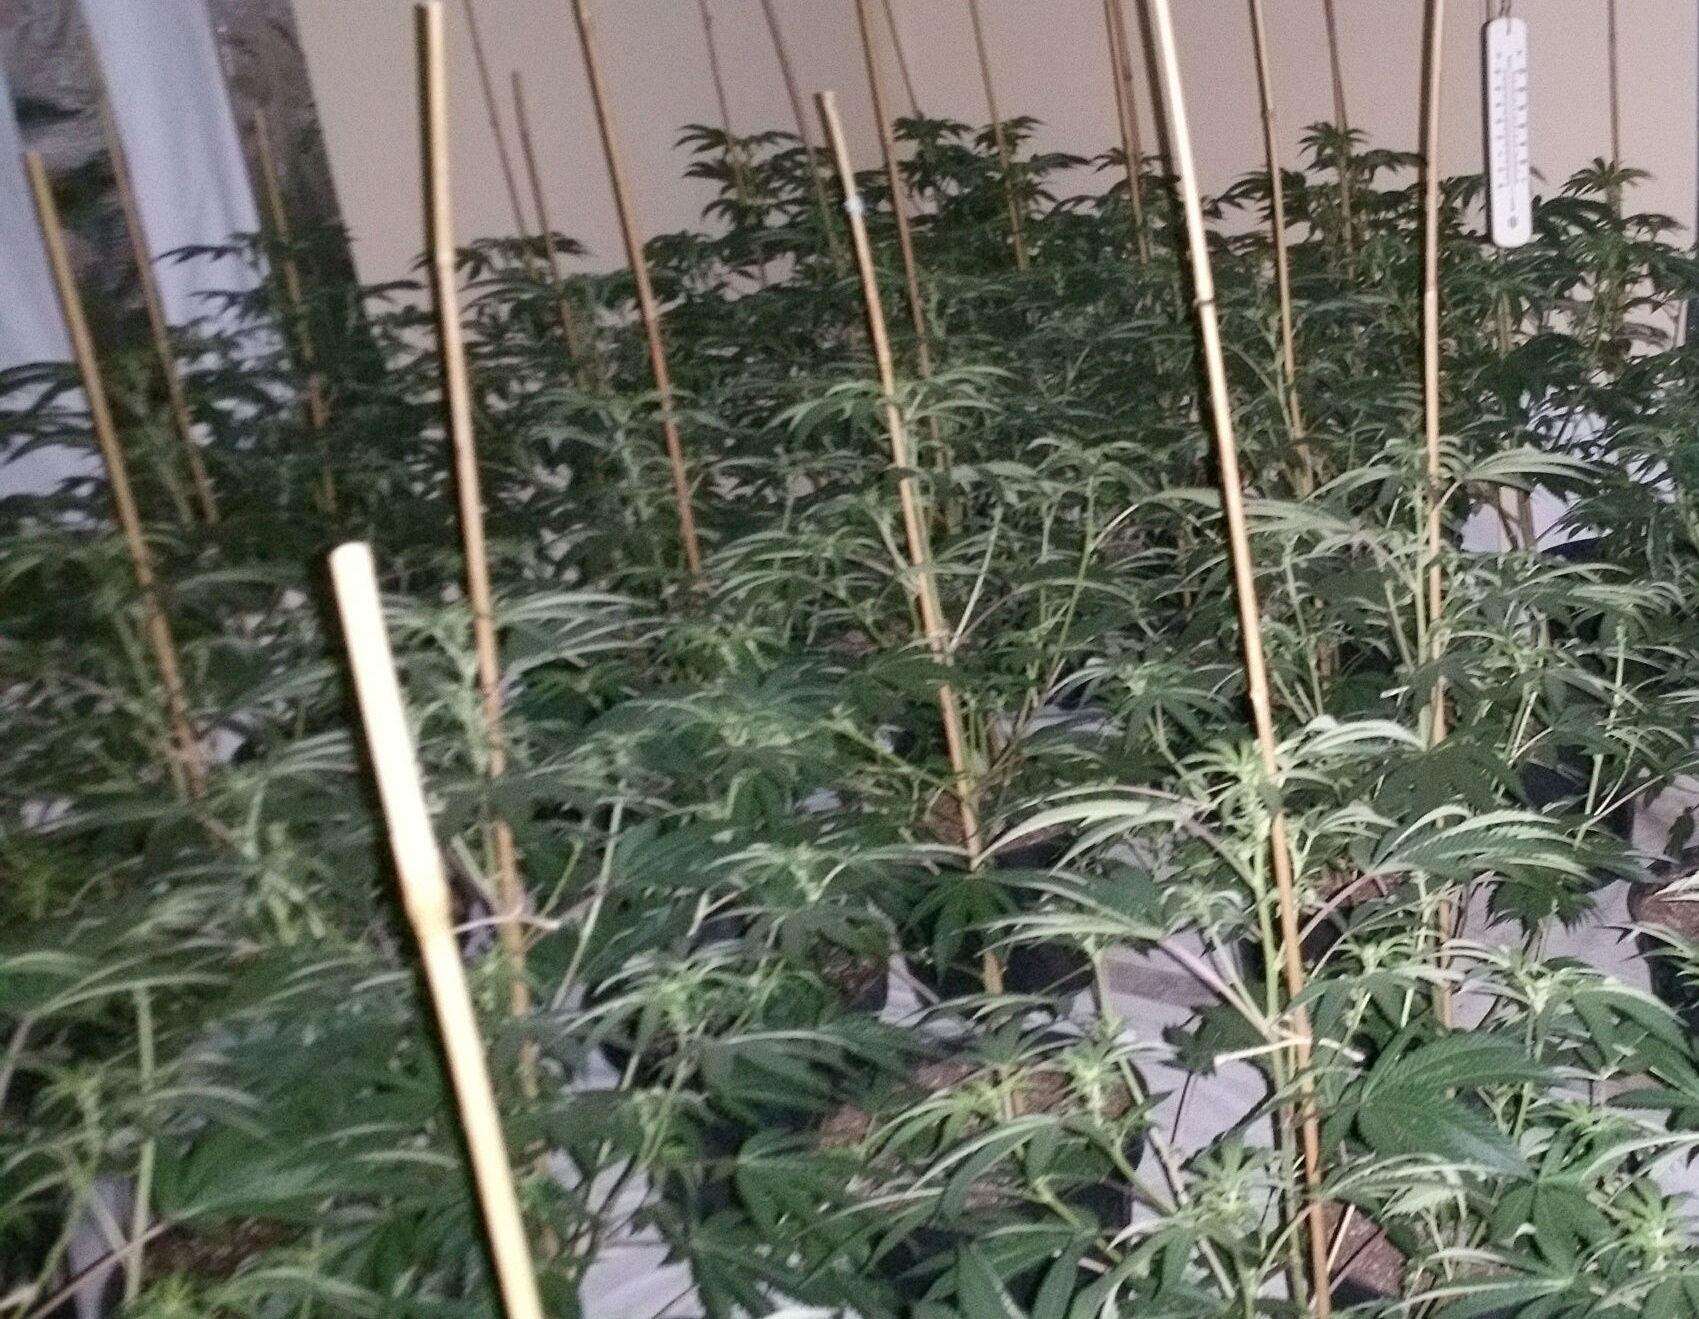 Officers found around 700 plants inside the house at "various stages of growth". Picture: Kent Police